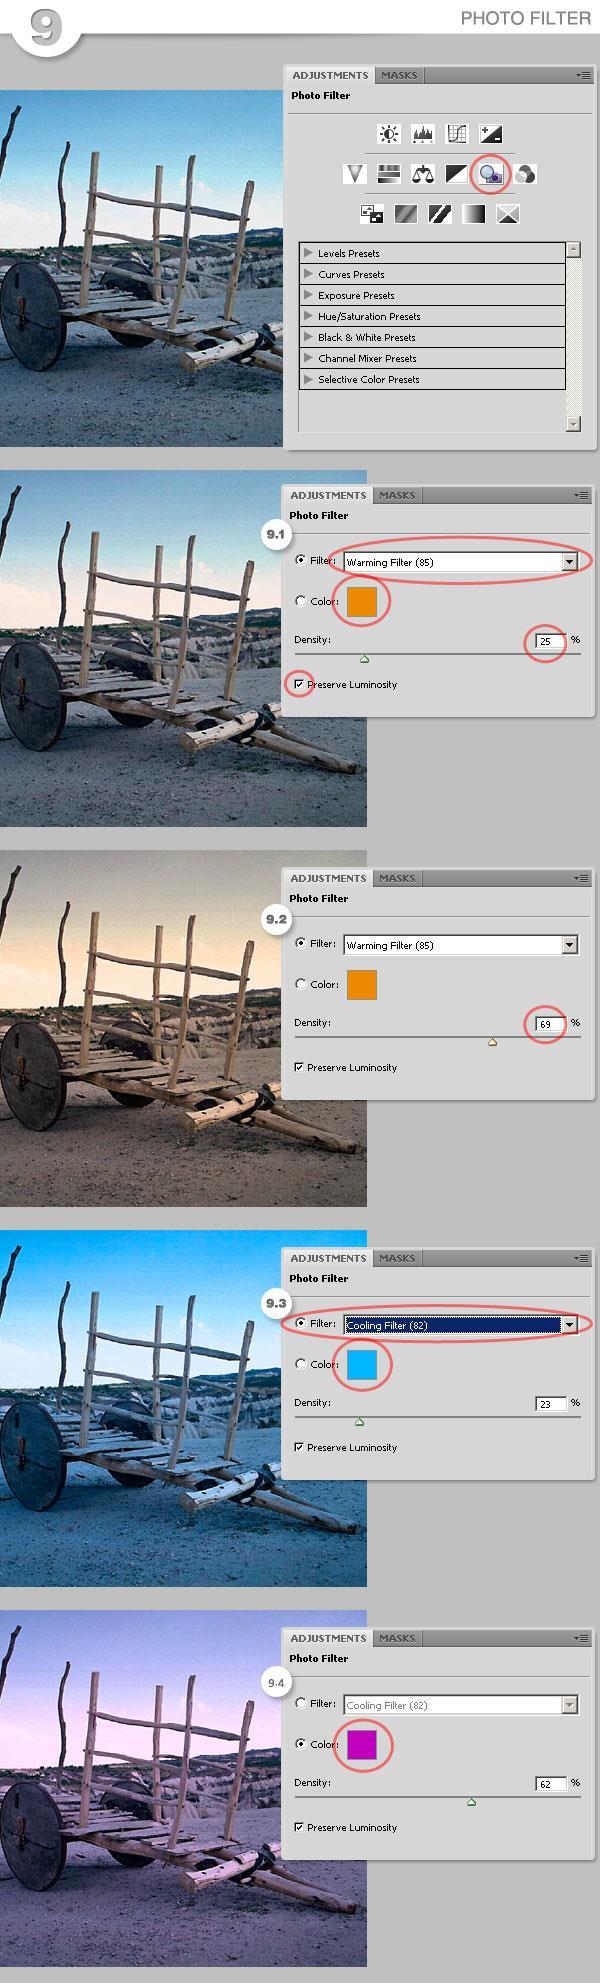 color intensity. Image 9.2 shows a warming filter by using an orange tone, and 9.3 shows a cooling filter by using a blue tone.